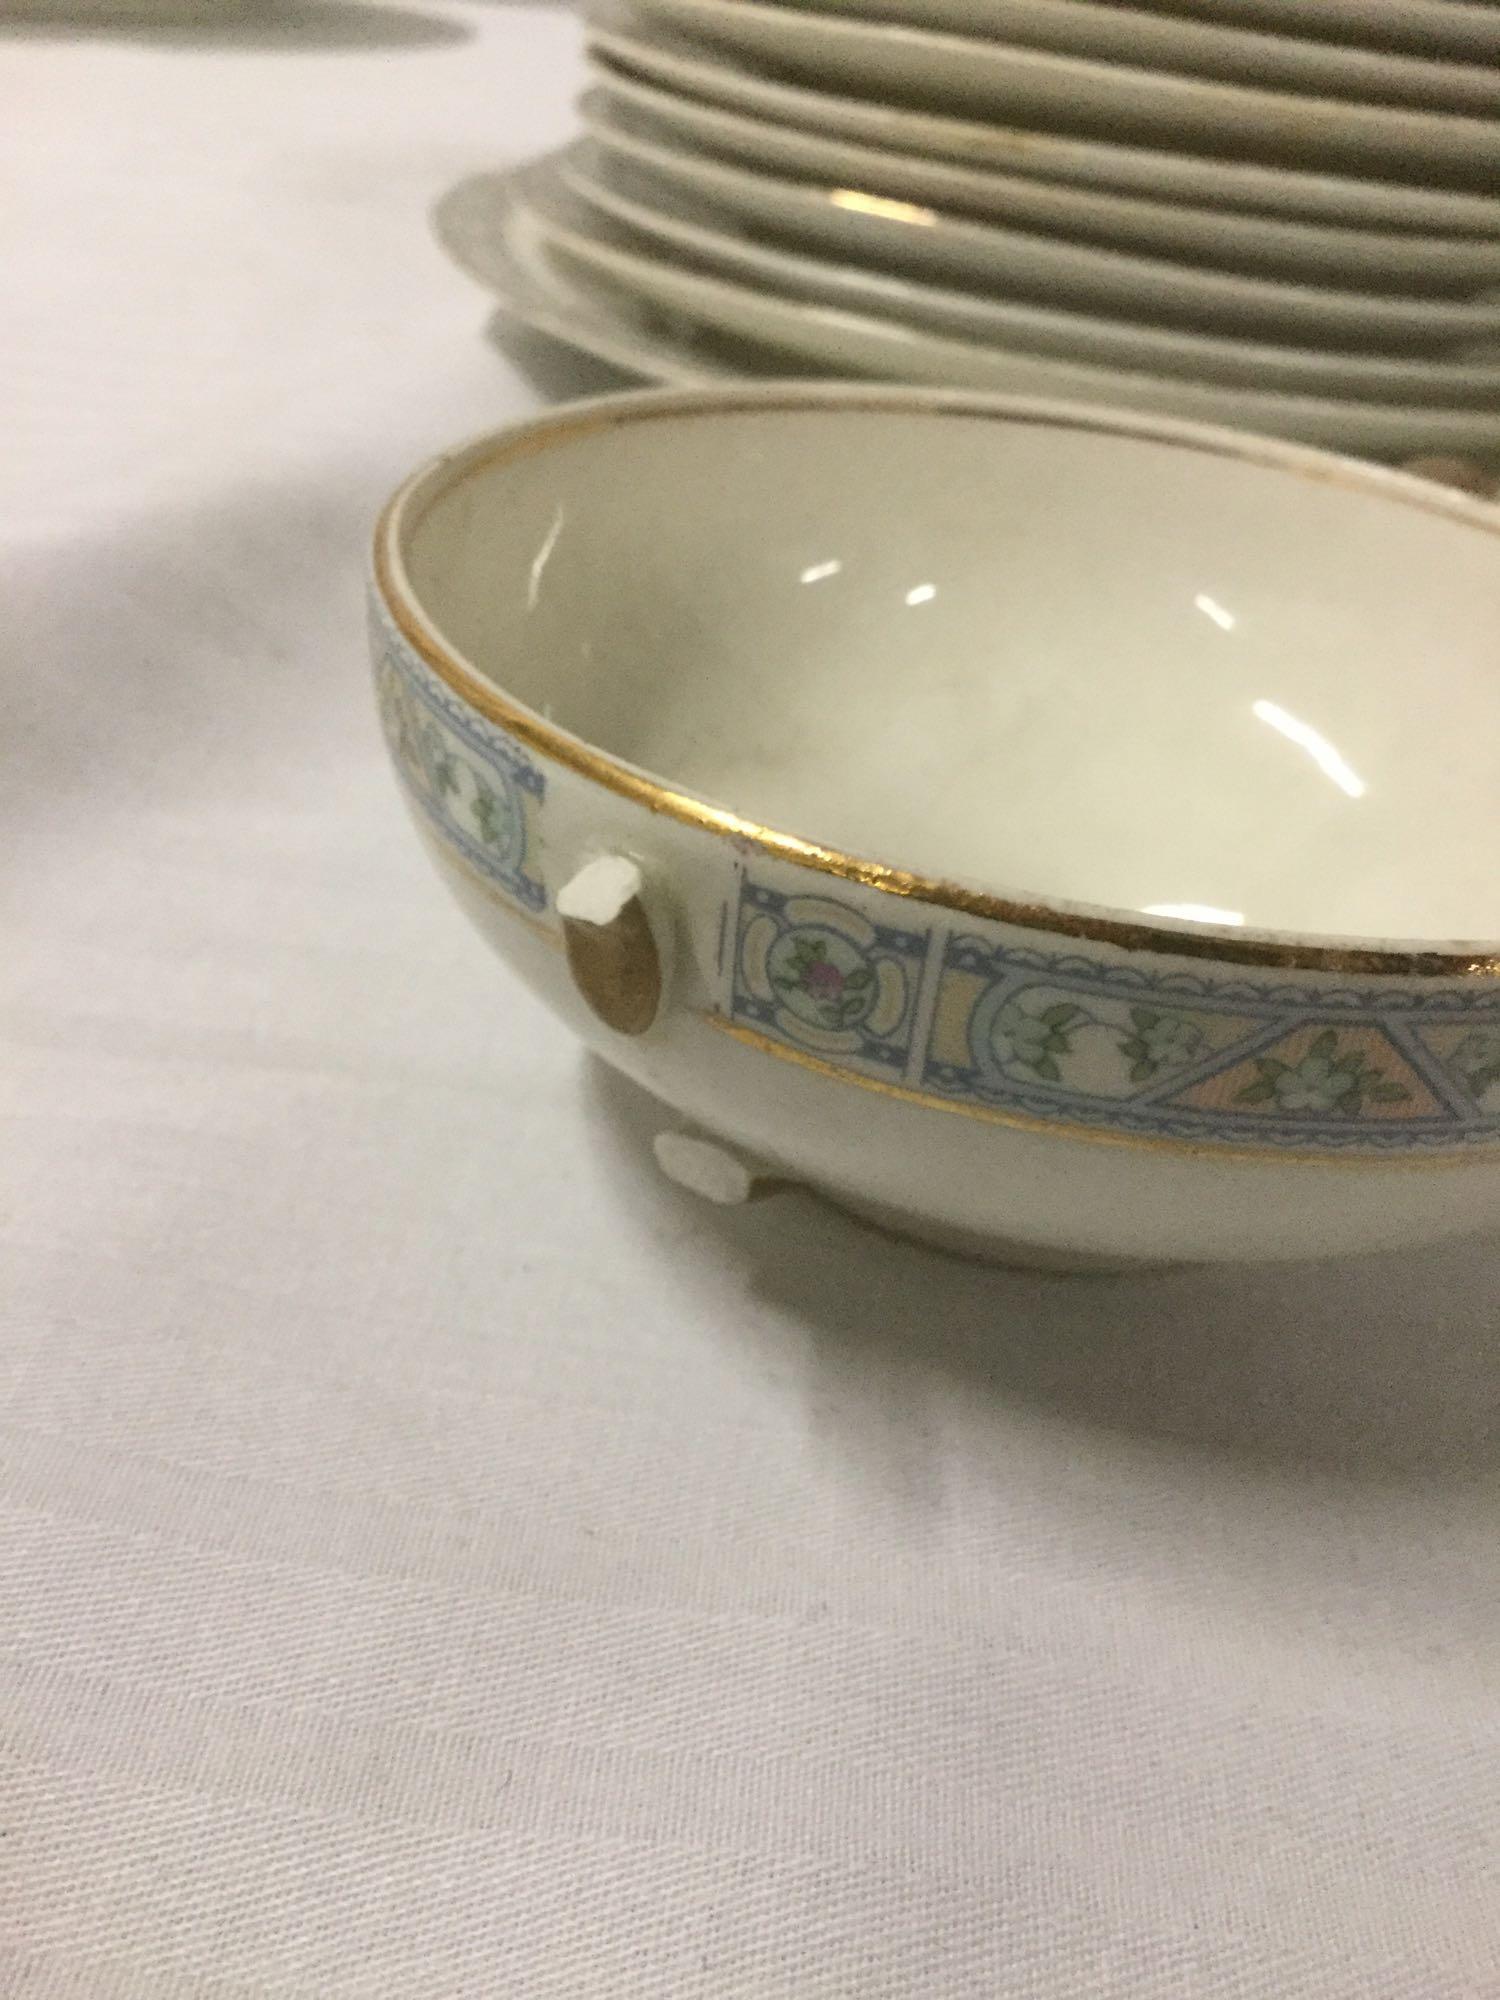 Over 65 pieces of Pope-Gosser China, incl. cups, saucers, bowls, platters, gravy boat, and more. Two